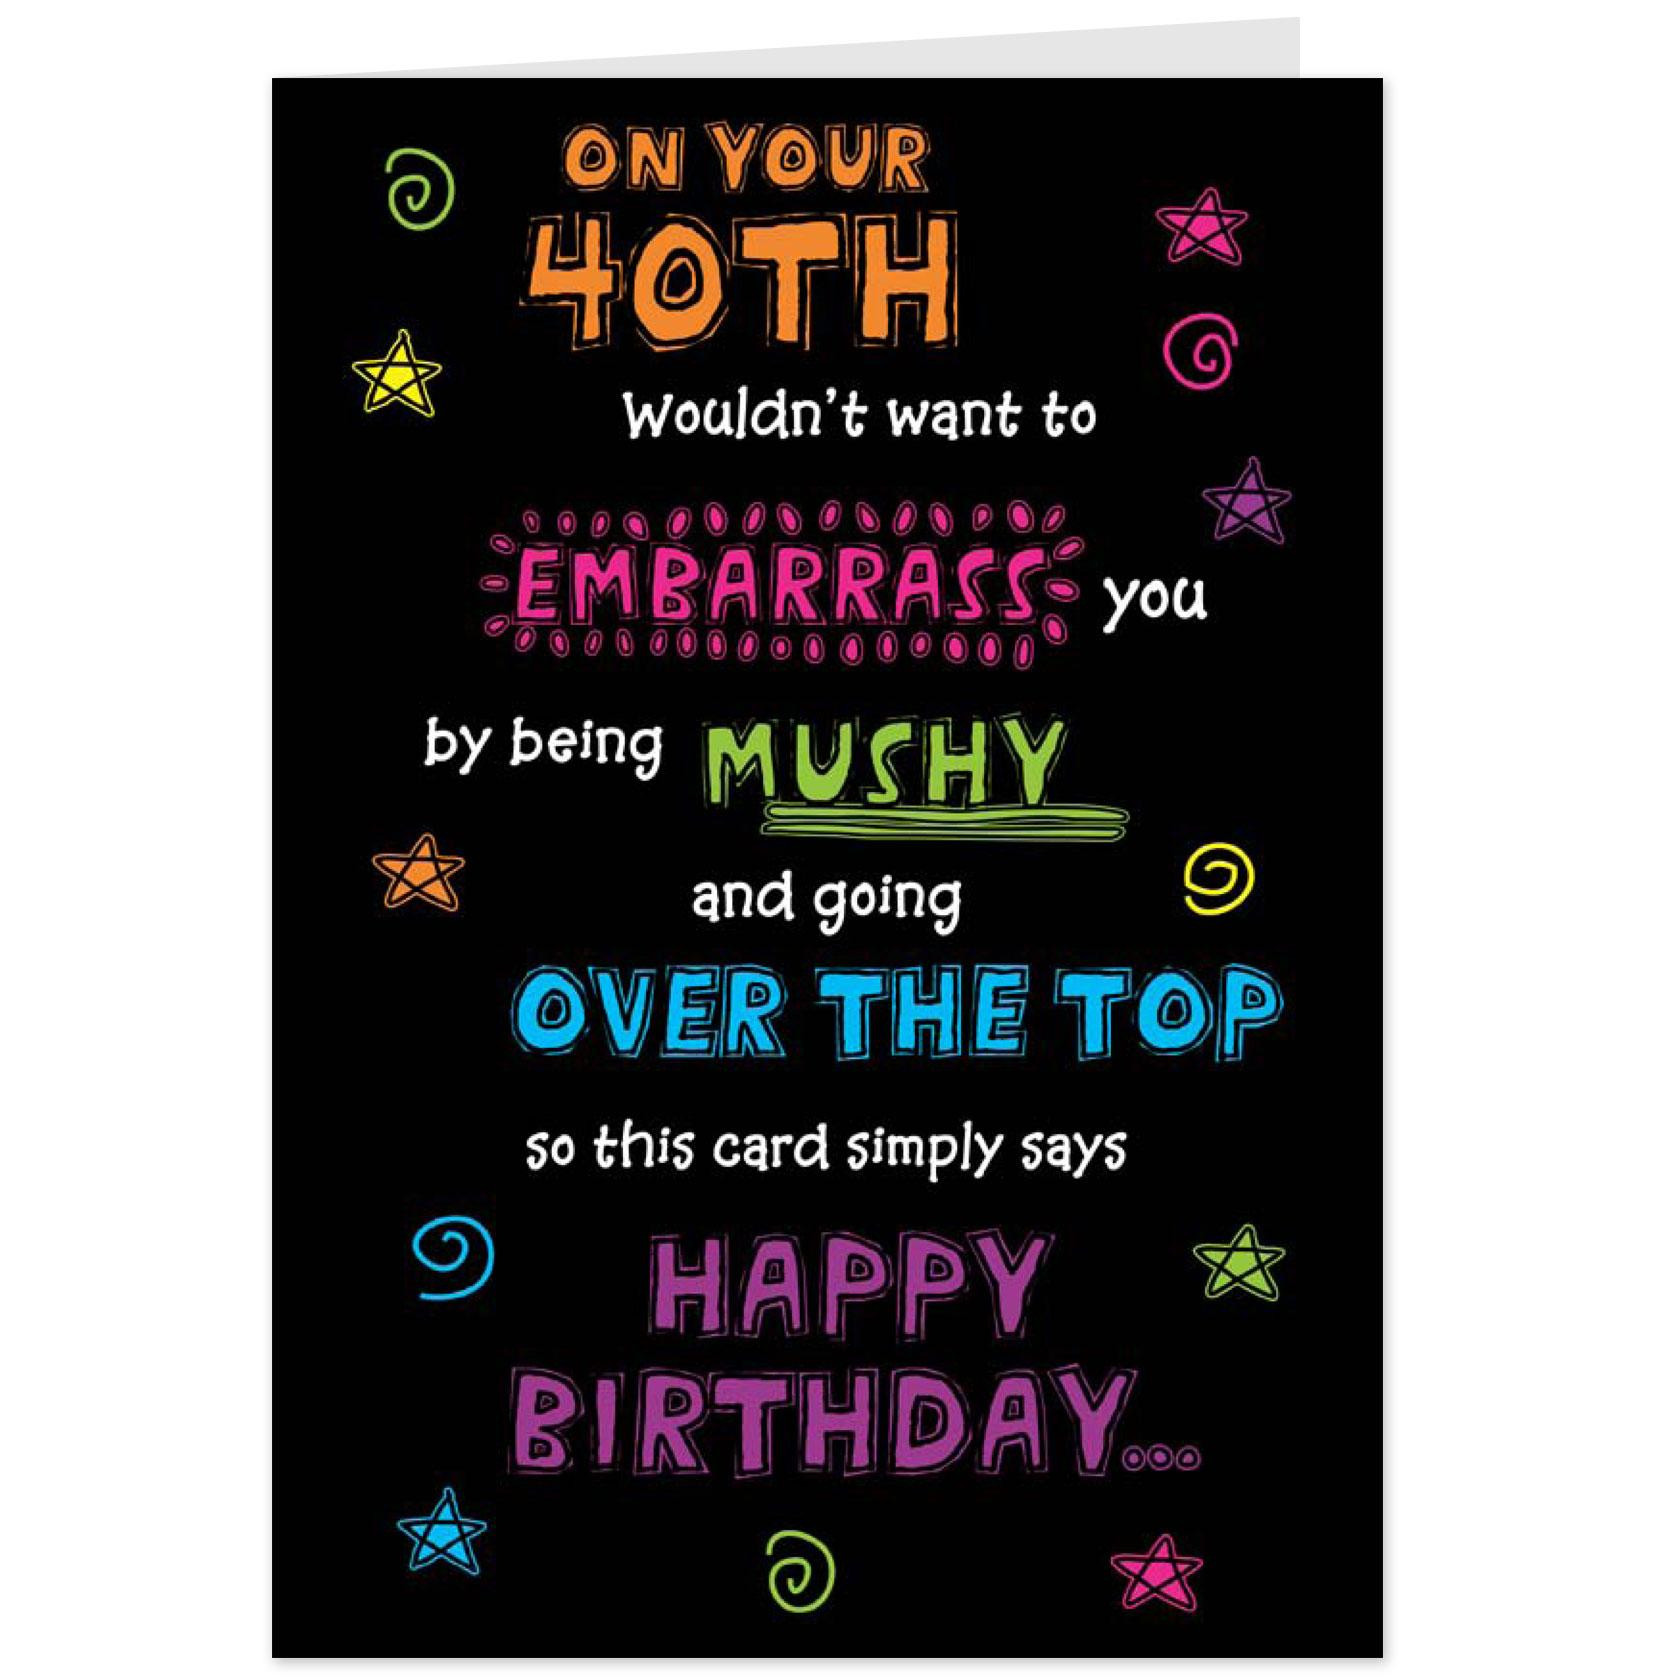 Happy 40th Birthday Quotes Funny
 Funny 40th Birthday Quotes QuotesGram